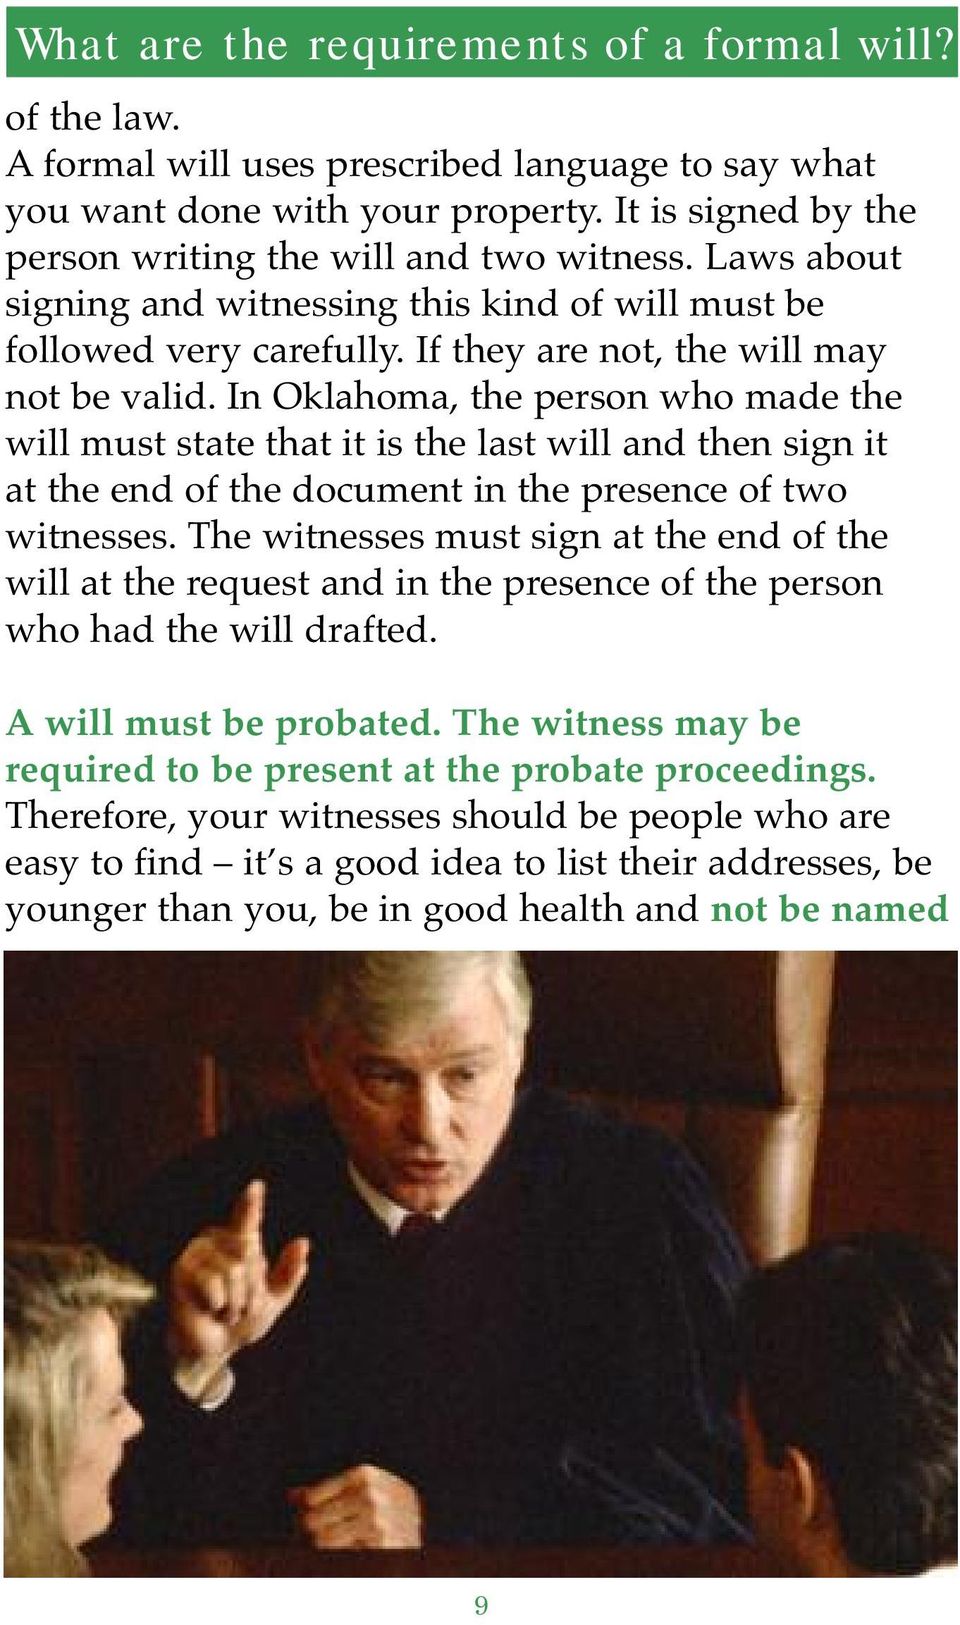 In Oklahoma, the person who made the will must state that it is the last will and then sign it at the end of the document in the presence of two witnesses.